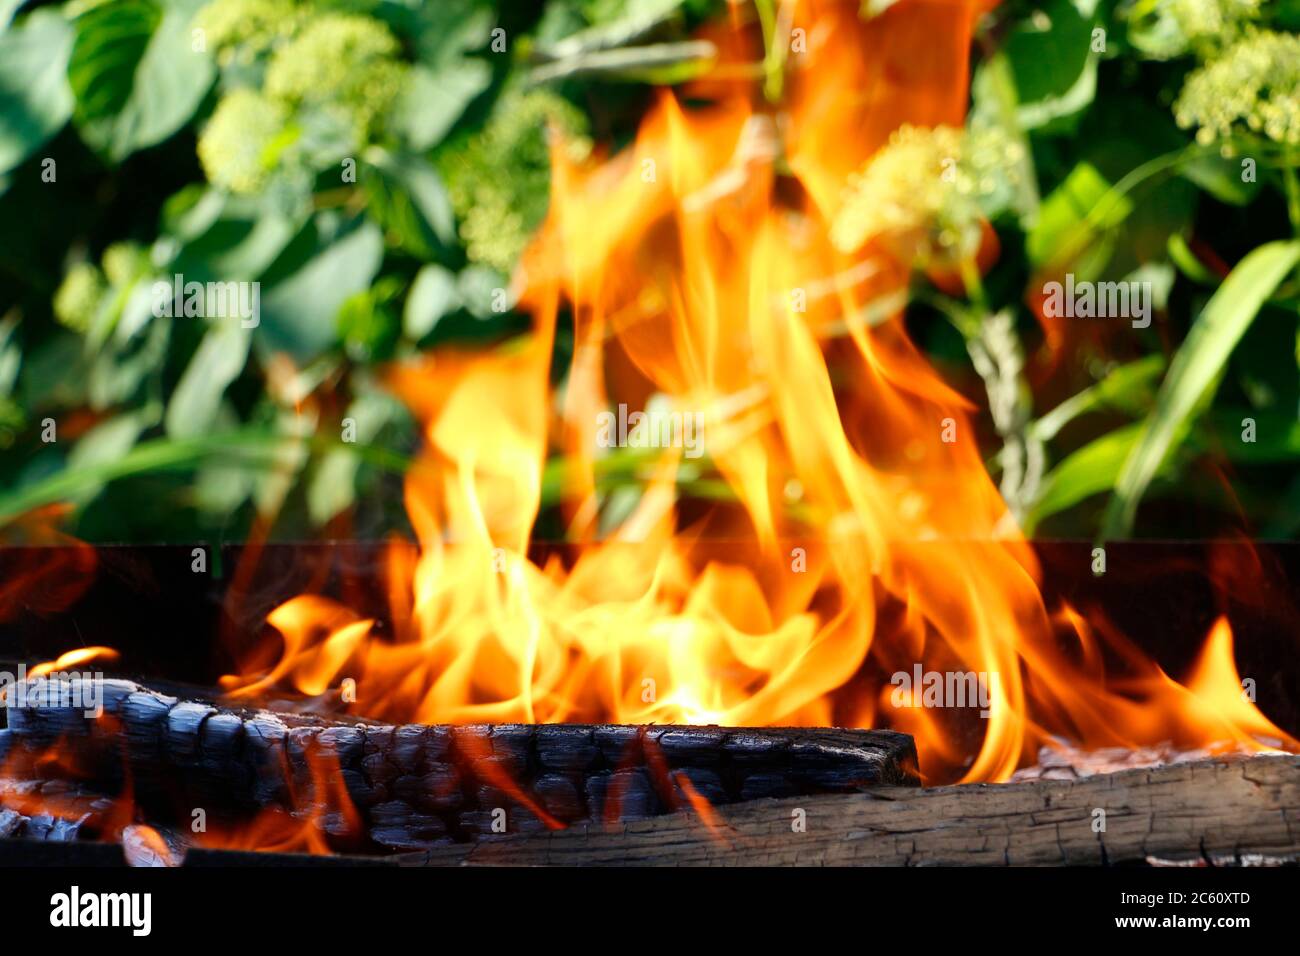 Bonfire. Orange flame of a fire. Bonfire on the grill with smoke. Arson or natural disaster. Bonfire close. Fire in nature. Bonfire background. Stock Photo